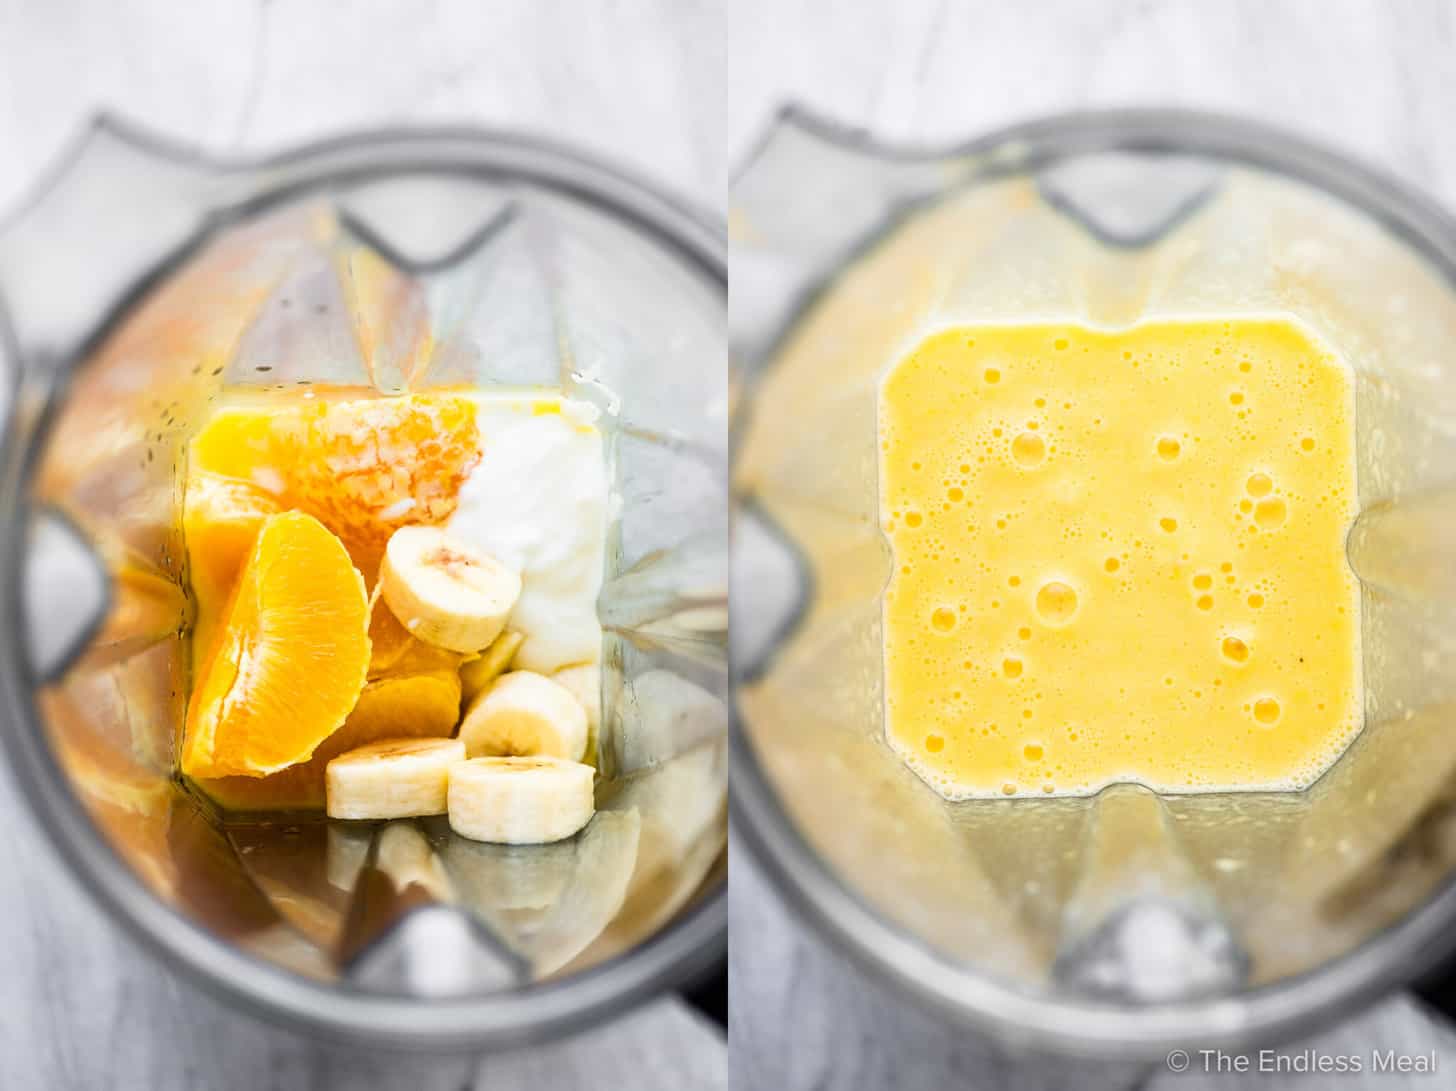 Before and after photos of the orange creamsicle smoothie ingredients in a blender.